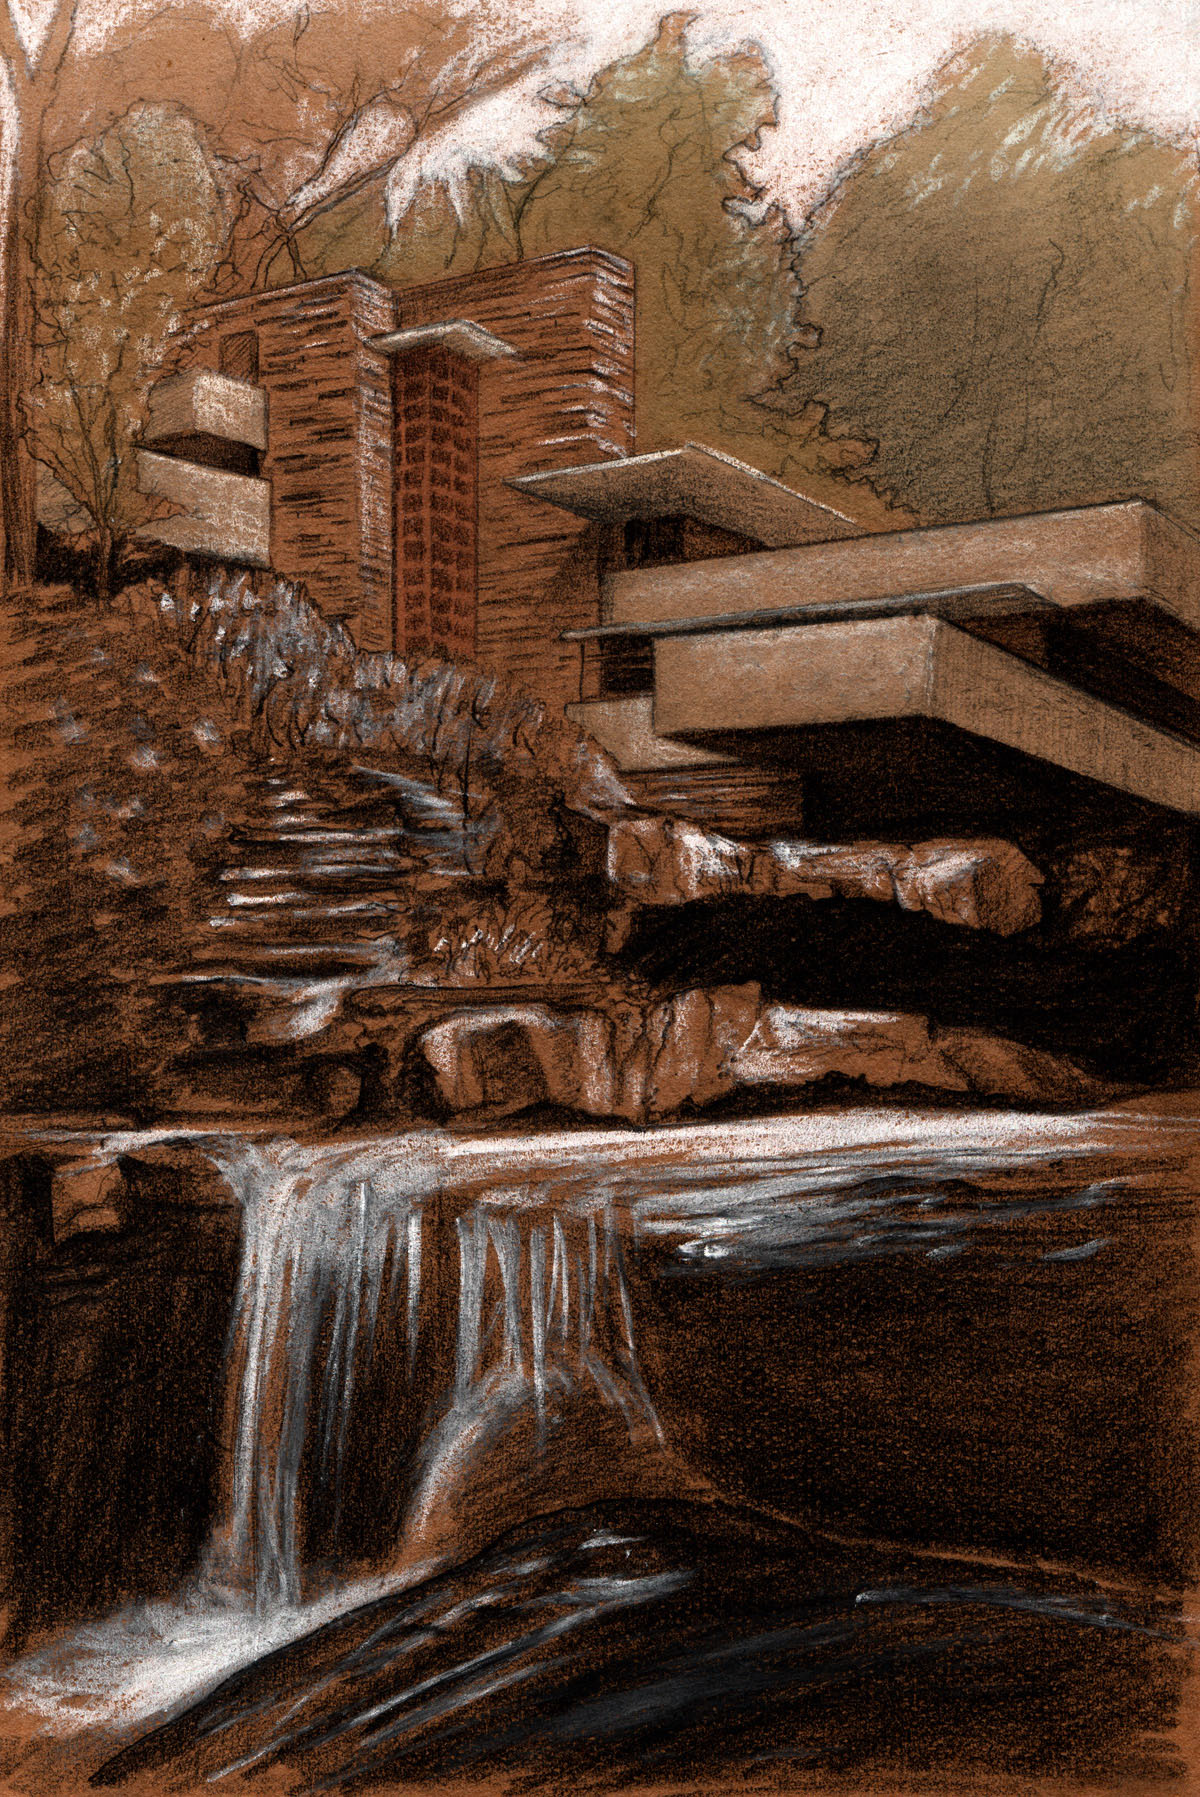 Chalk and pencil drawing of Falling Water by architect Frank Lloyd Wright